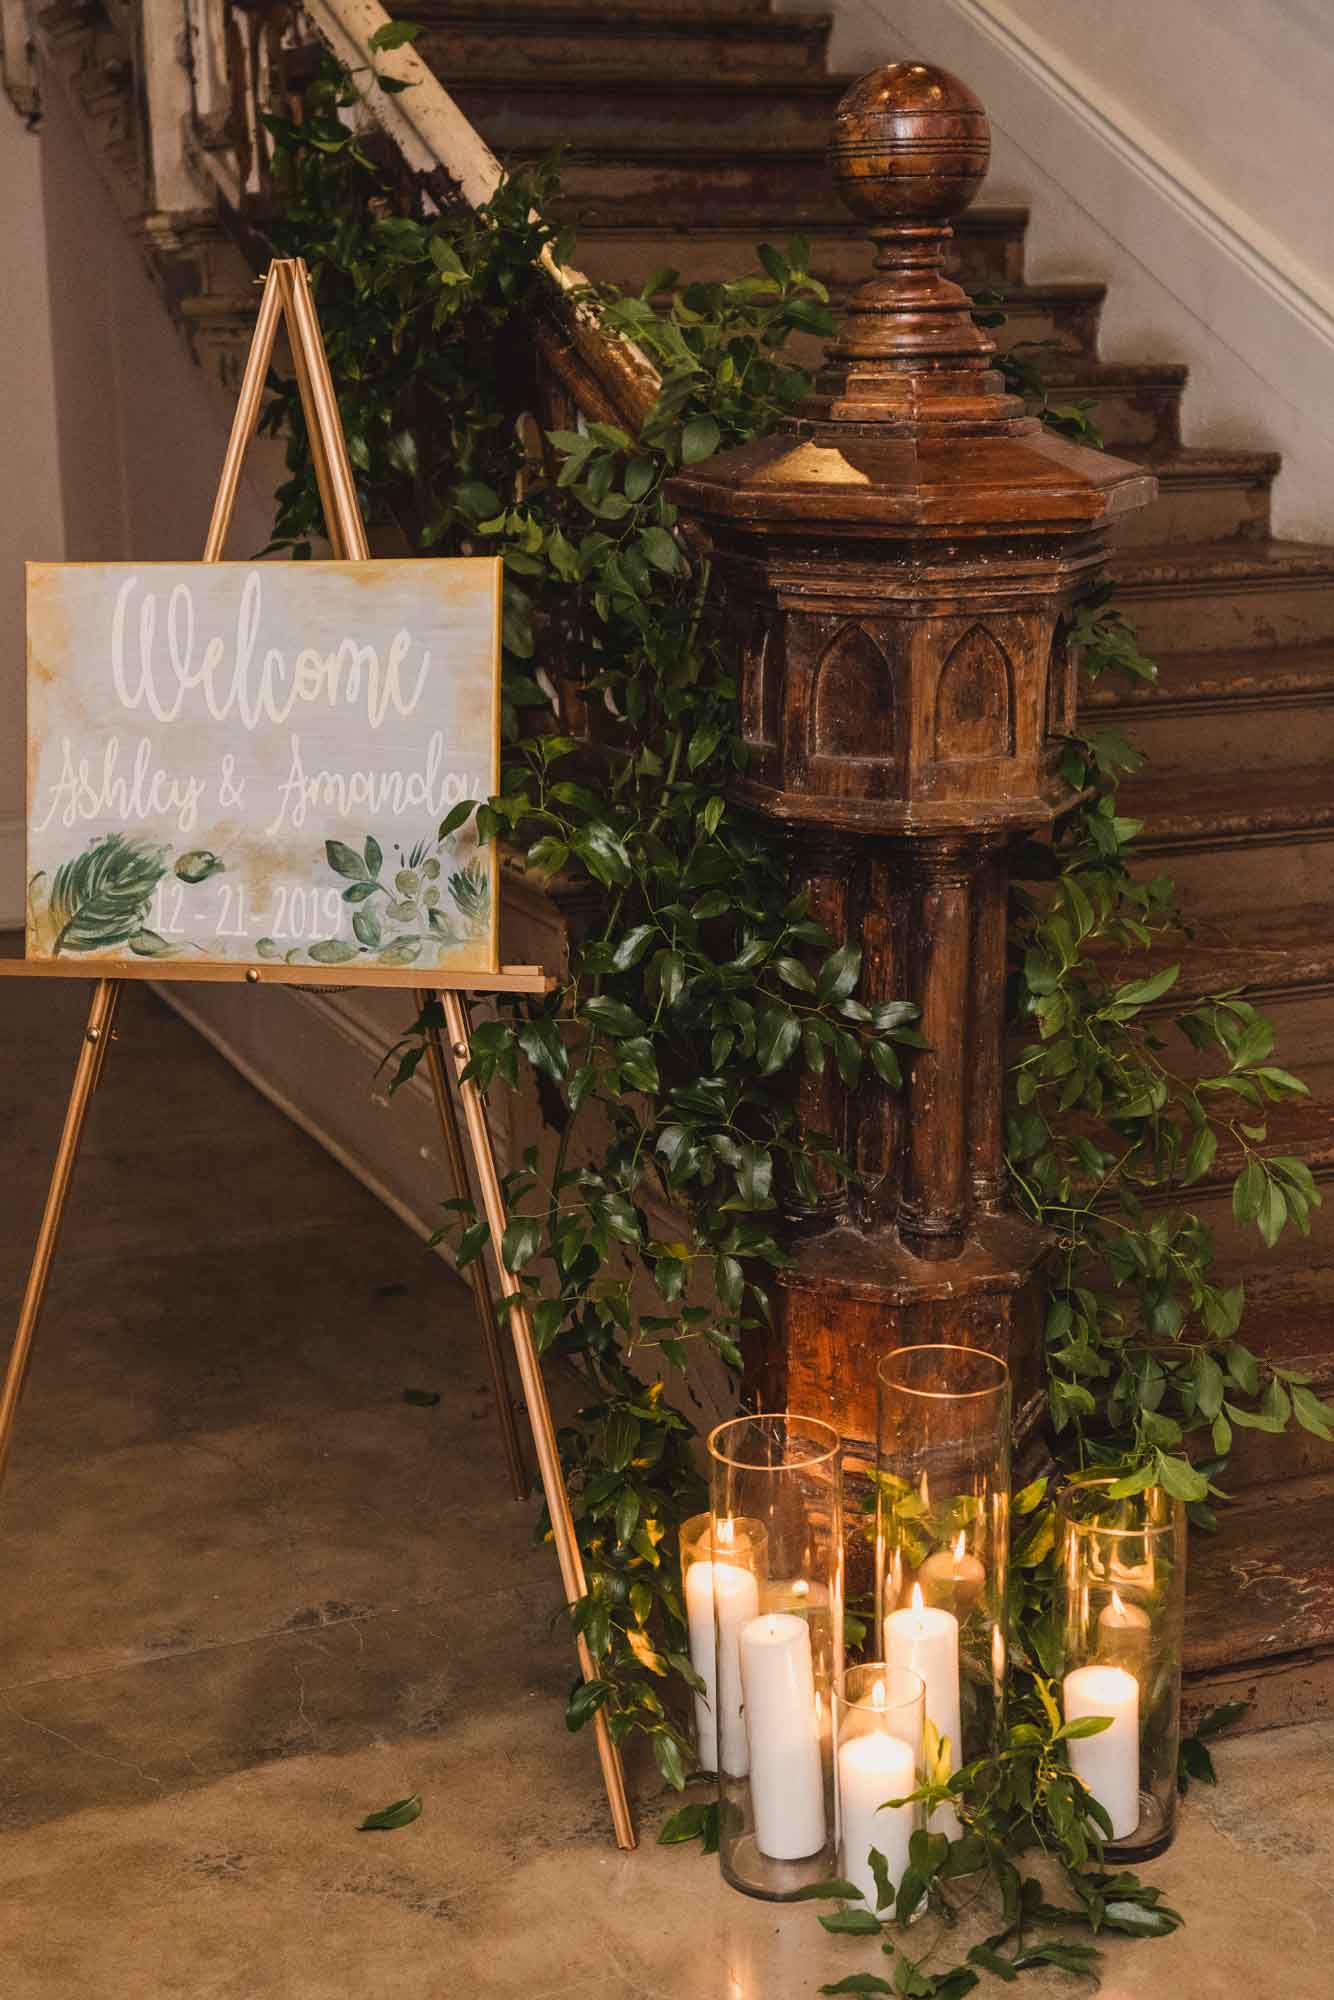 New Orleans December church wedding with bubble sendoff welcome sign